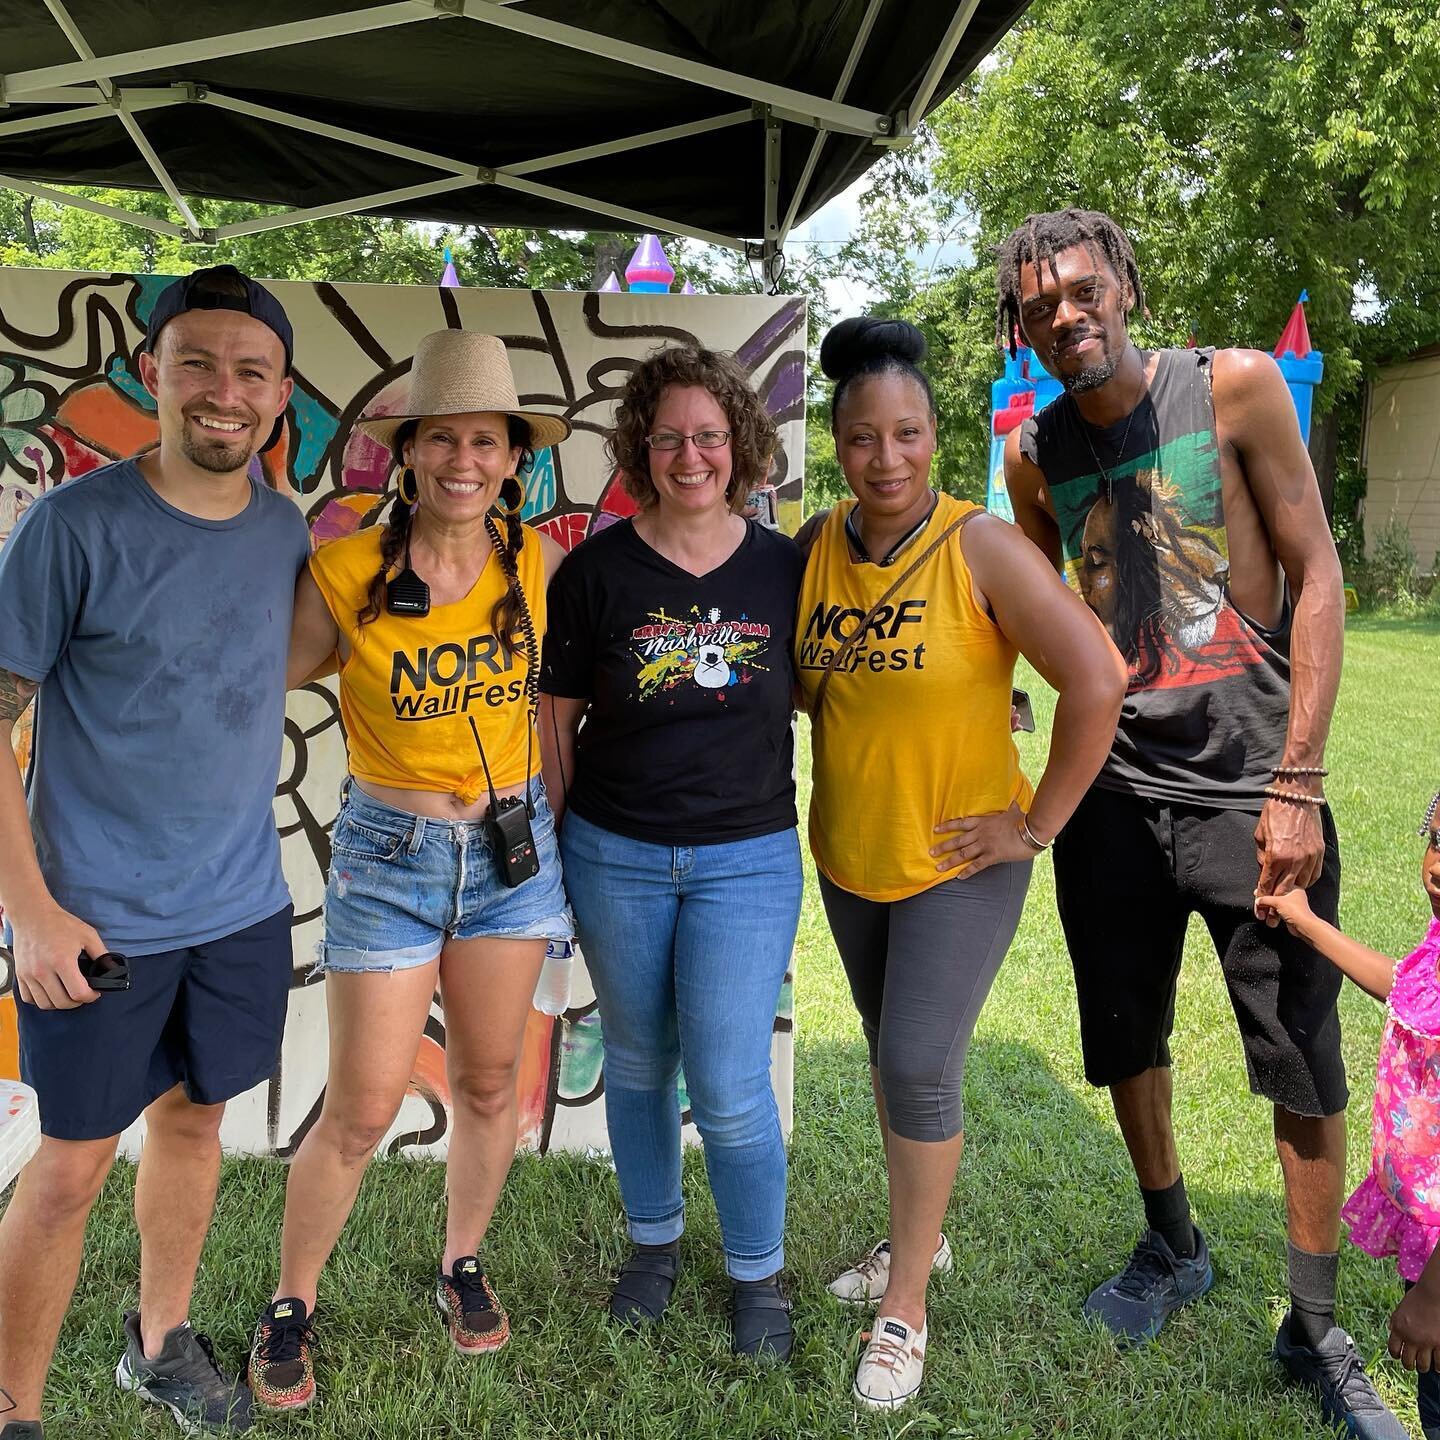 @norfwallfest was a beautiful place where community came together to heal, grow, and be enriched through art in North Nashville 🎨🎉

Many thanks to @woke3 for standing strong in his vision for @norfwallfest @norfstudios 🙌🎨

We need more of us risi